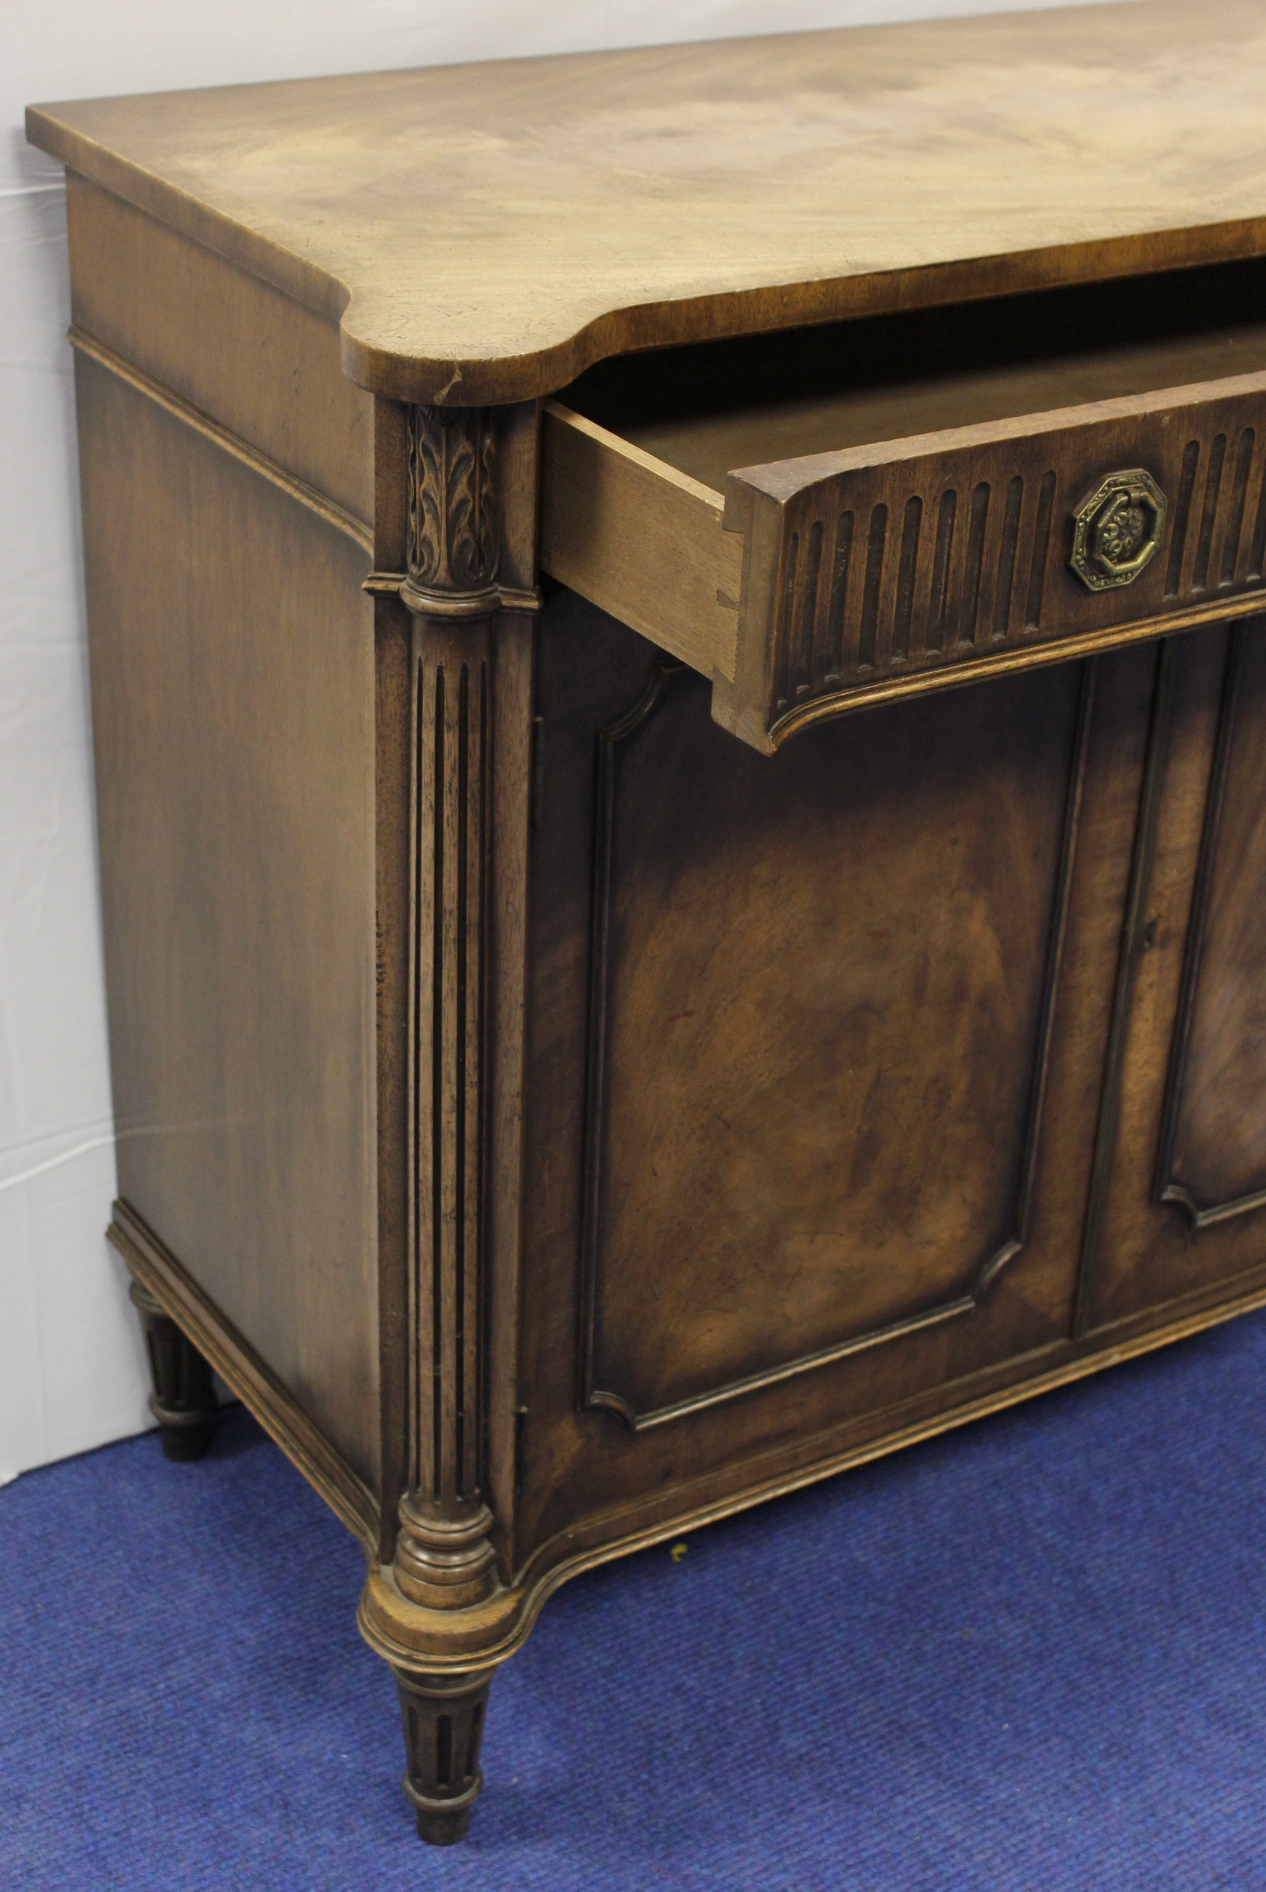 Edwardian mahogany cabinet with a pair of panelled doors  85cm wide, 82cm high, 45cm deep - Image 3 of 3